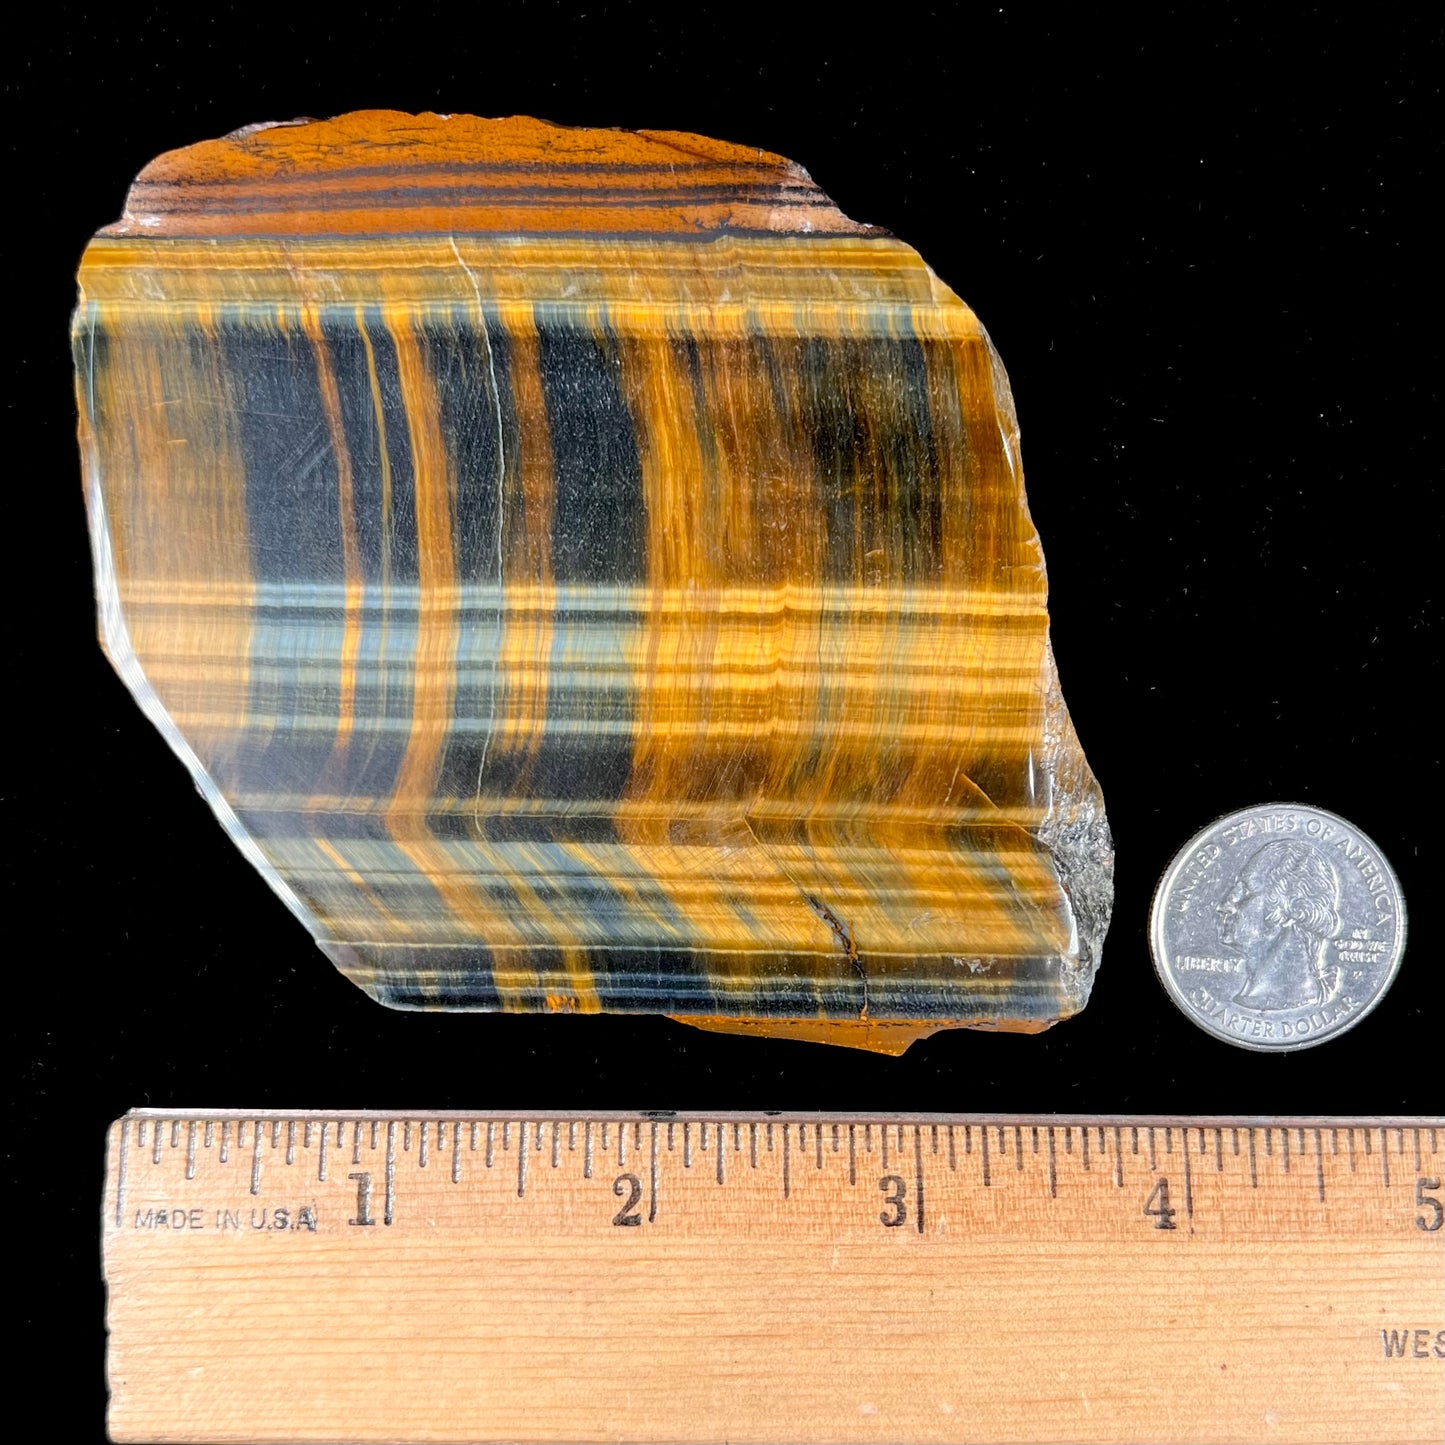 A polished slab of yellow tiger's eye with blue streaks.